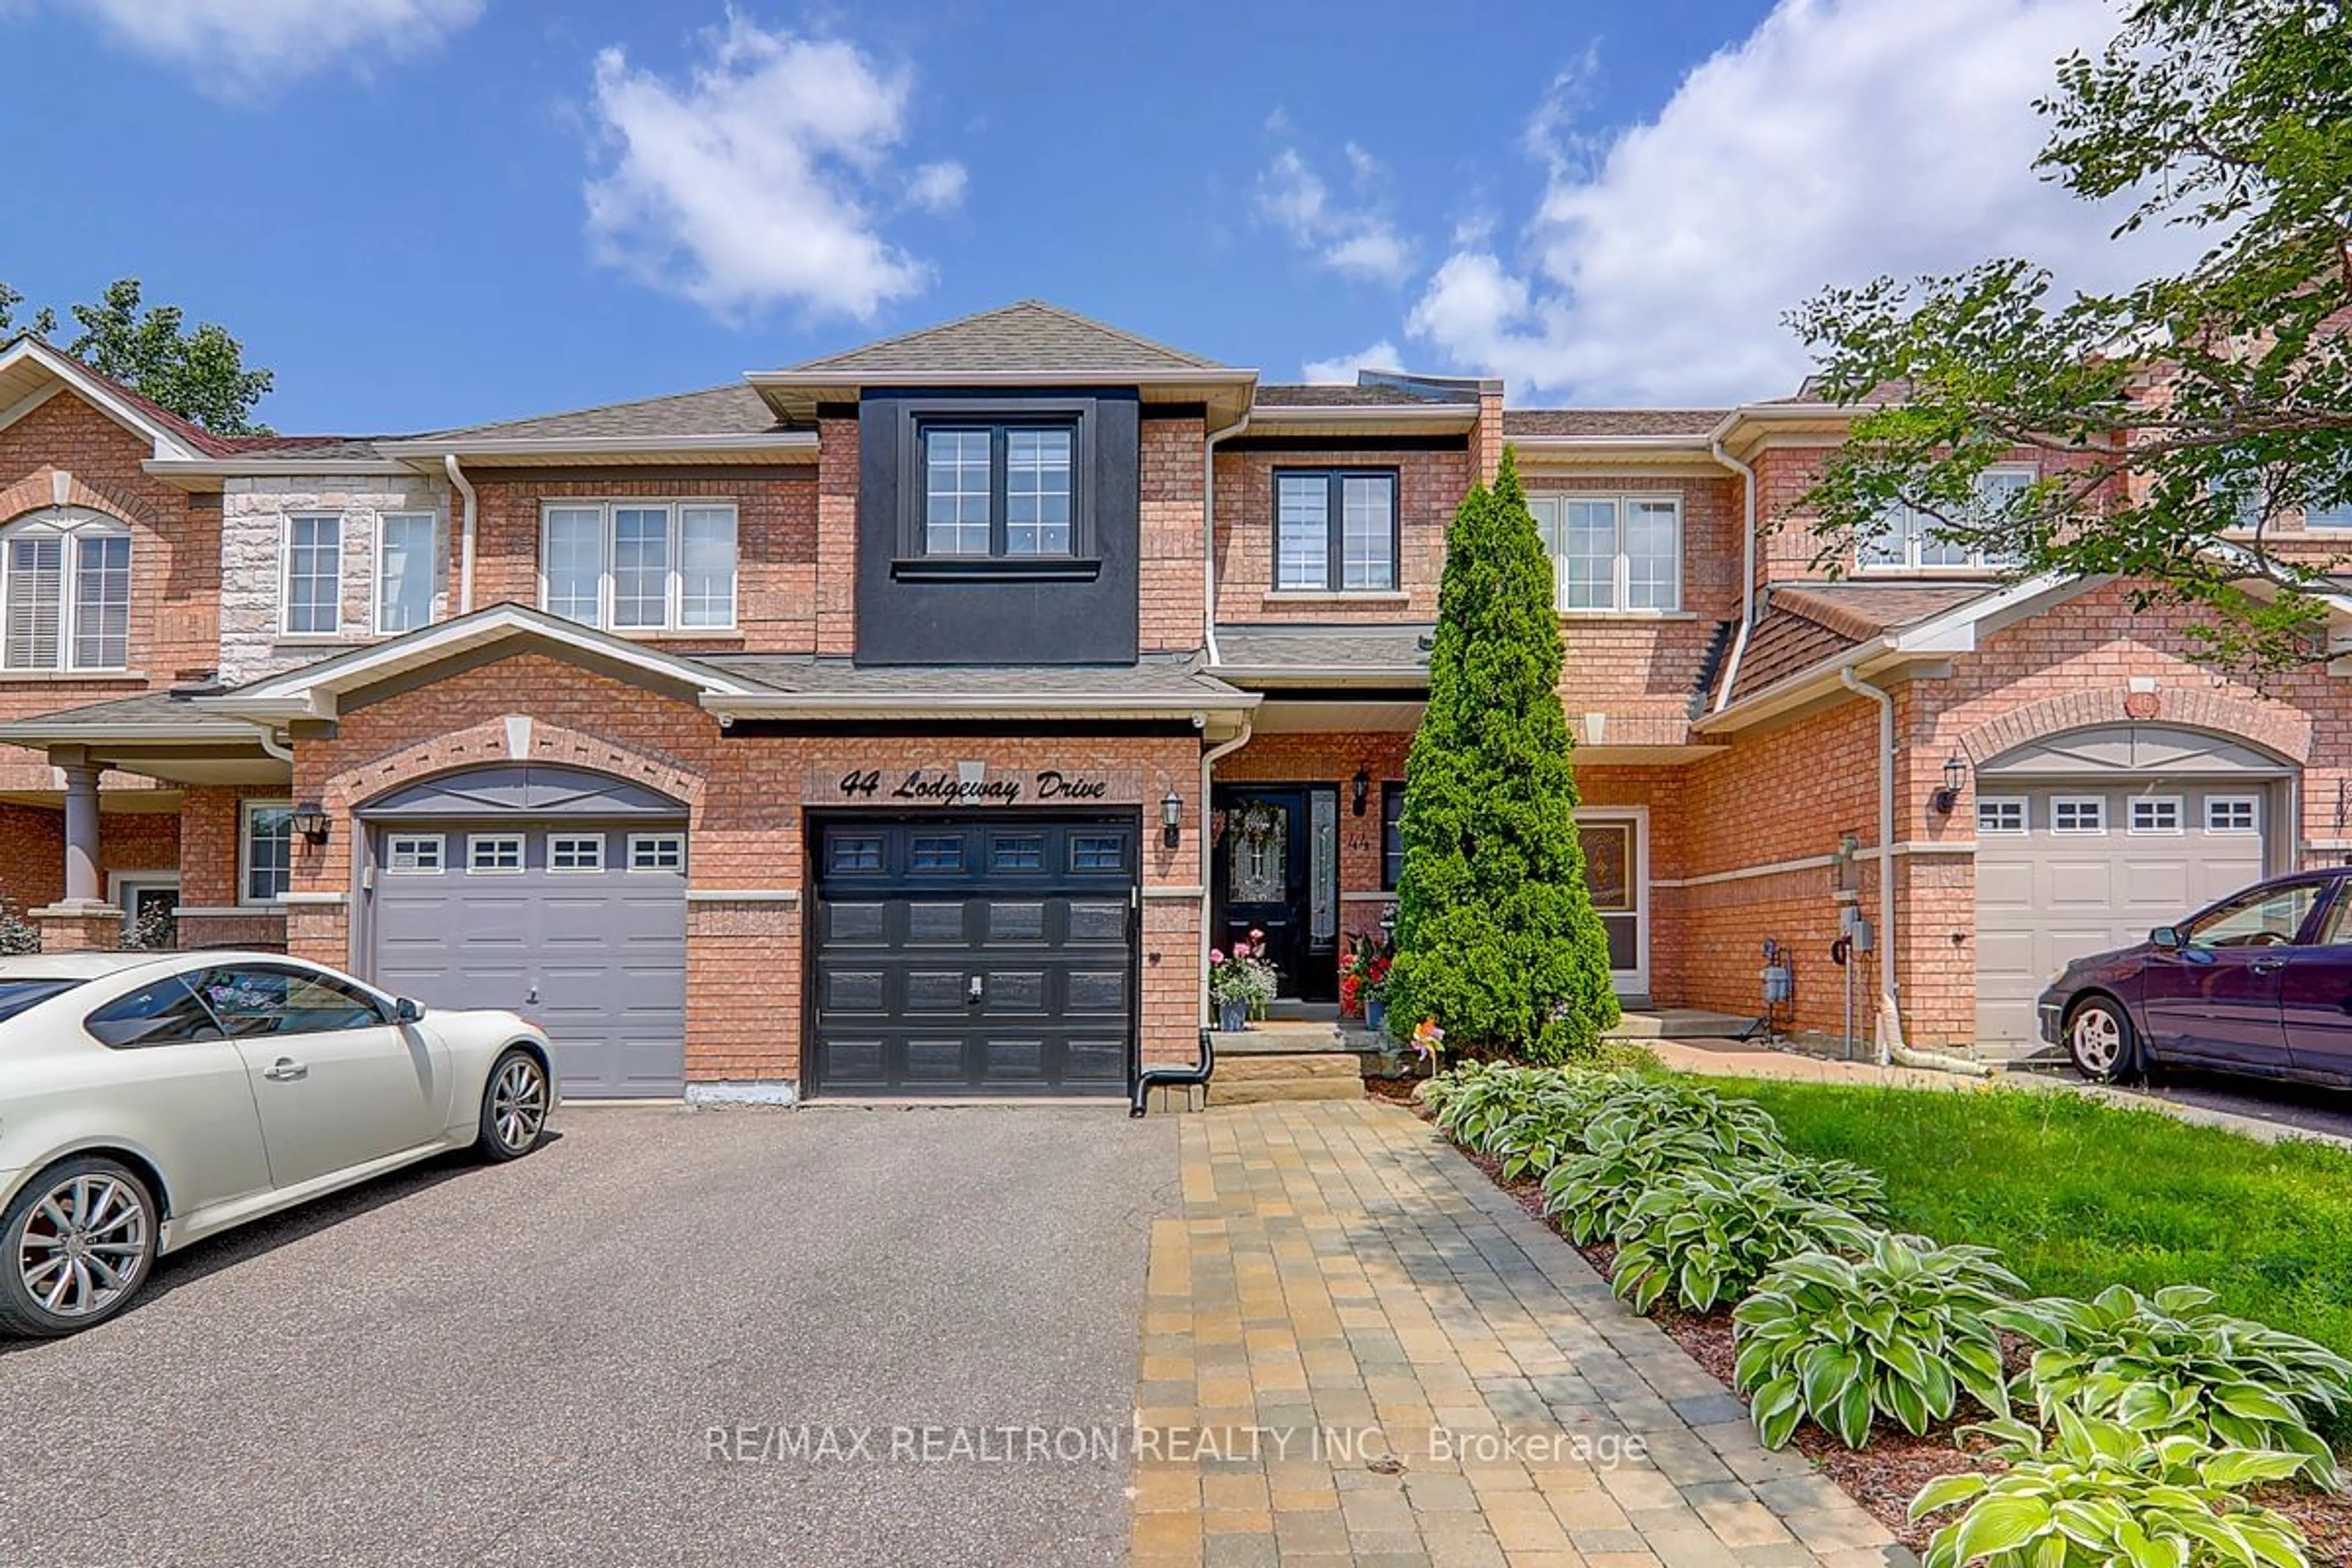 Home with brick exterior material for 44 Lodgeway Dr, Vaughan Ontario L6A 3S6